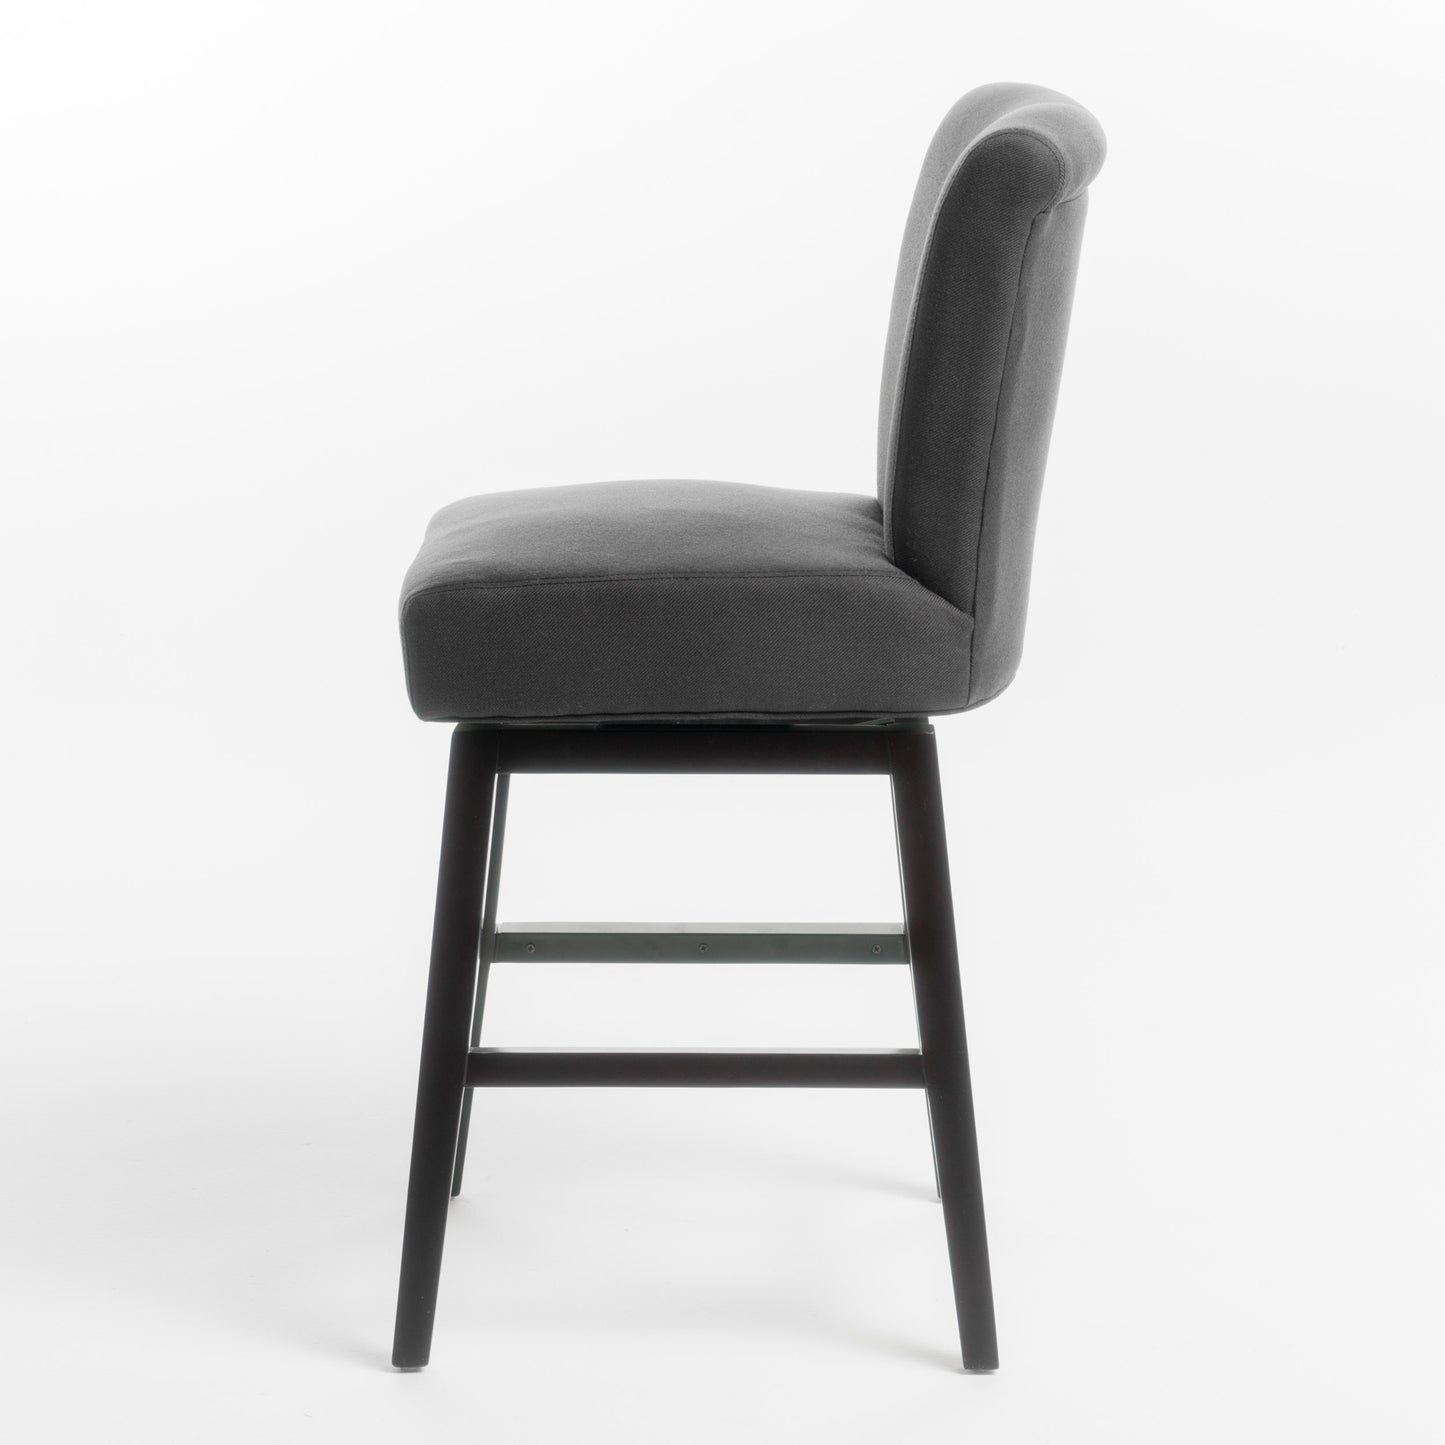 Tristan Contemporary Dark Charcoal Fabric Upholstered Swivel Counter Stool